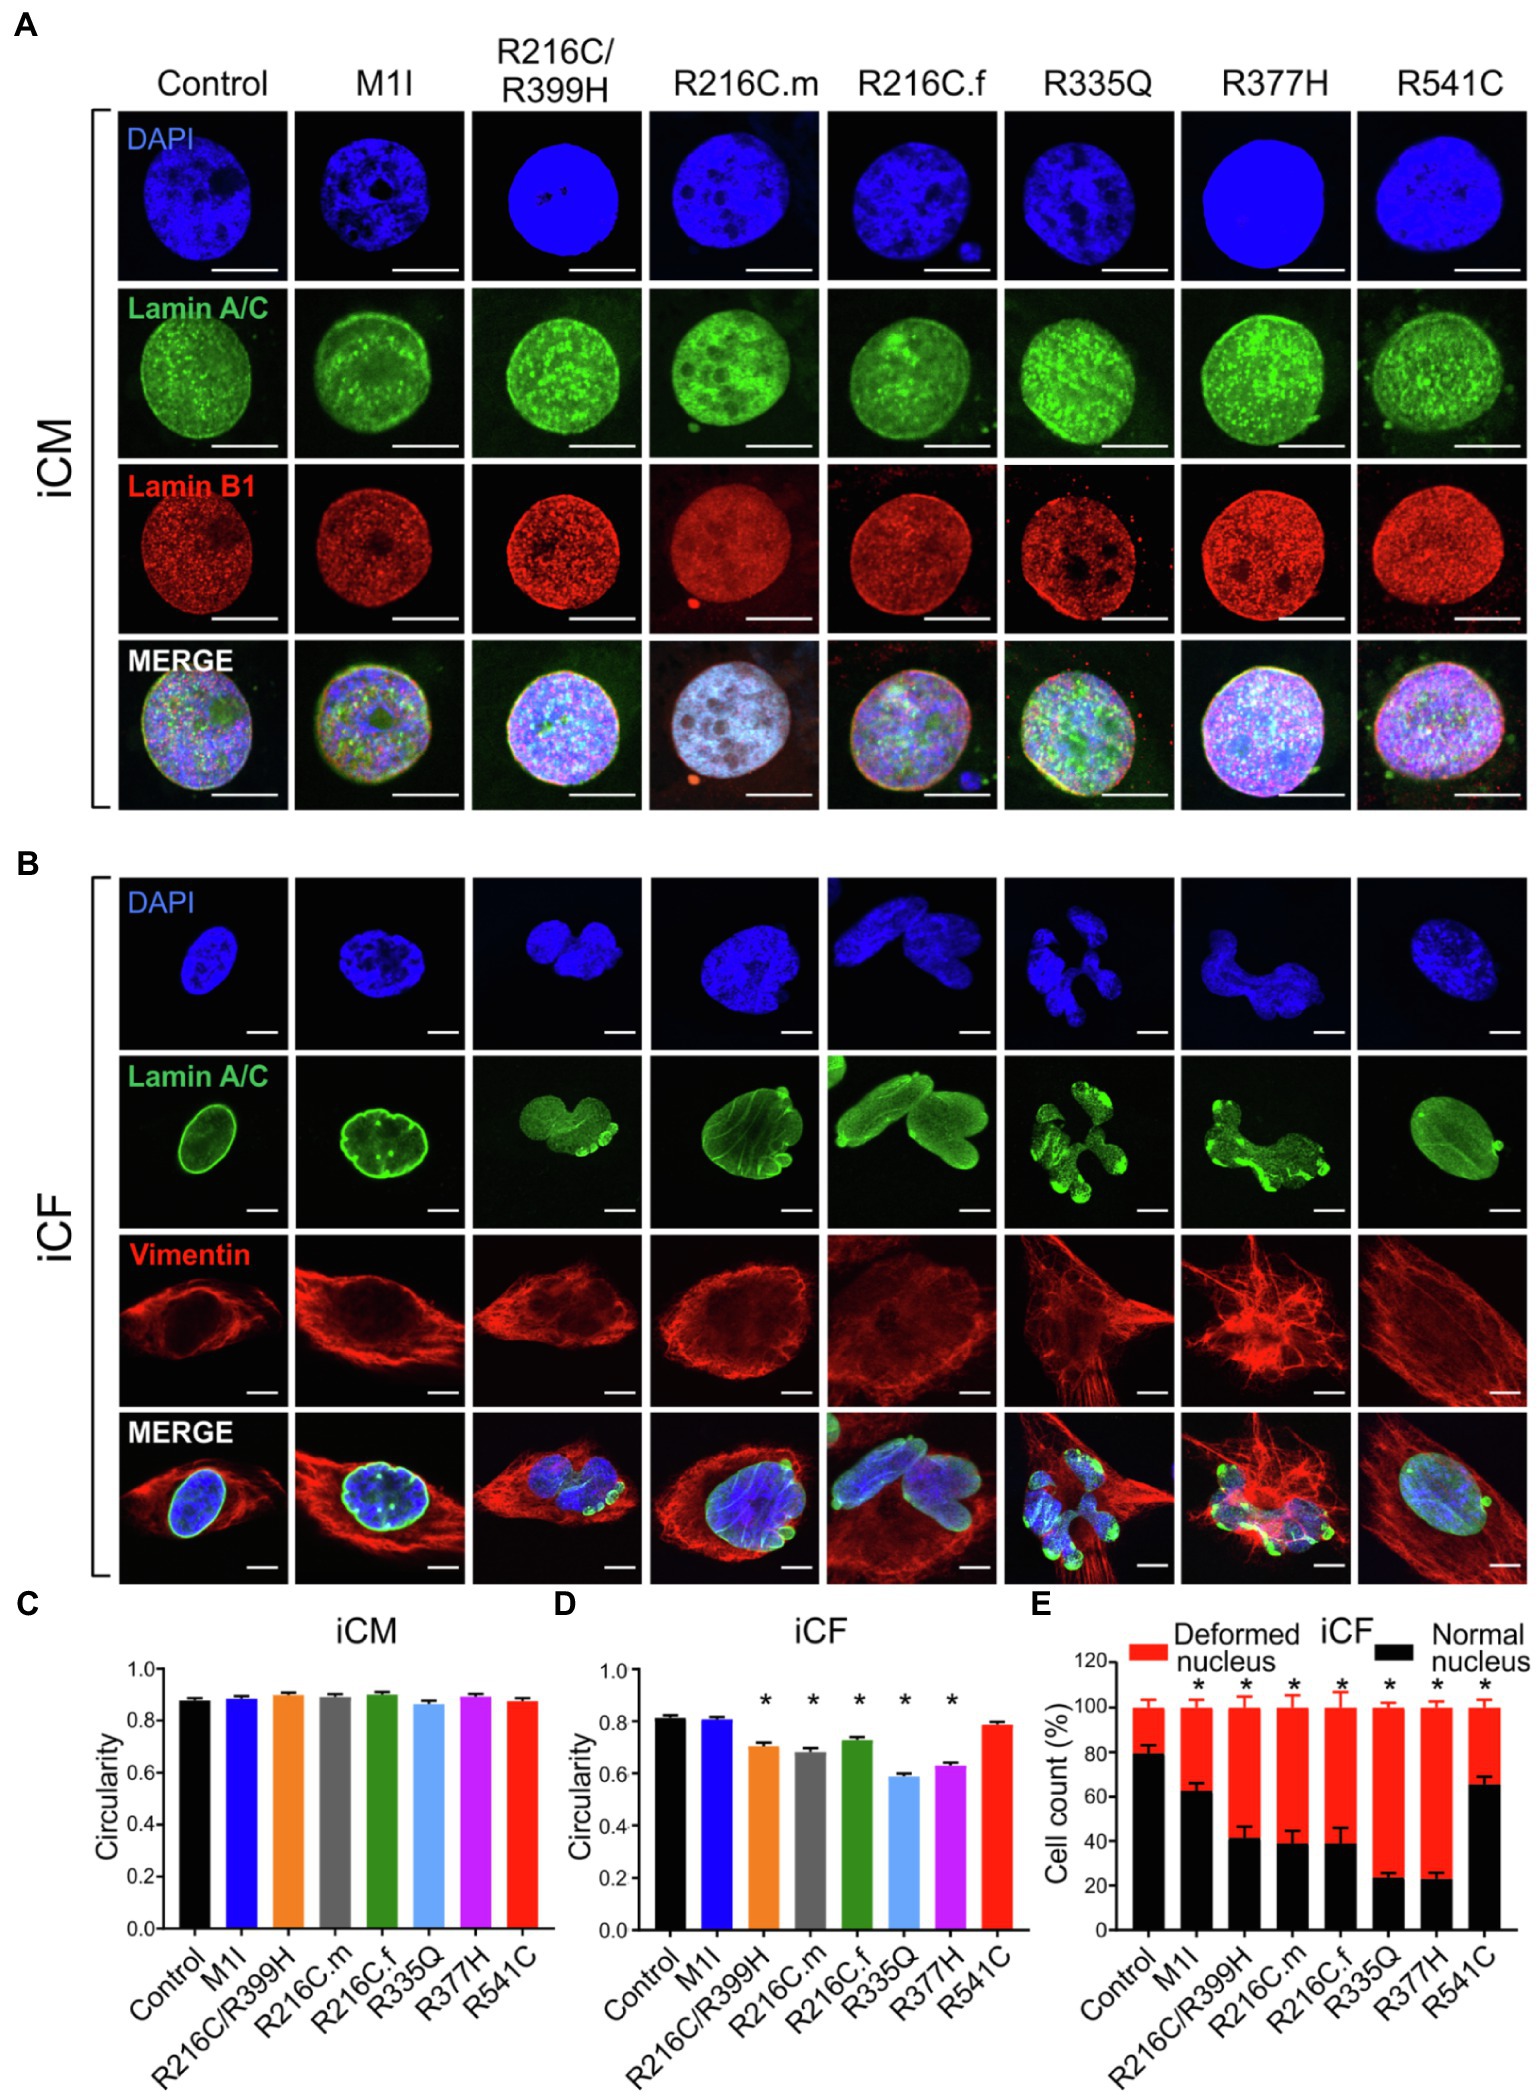 Phenotypic Variability in iPSC-Induced Cardiomyocytes and Cardiac Fibroblasts Carrying Diverse LMNA Mutations